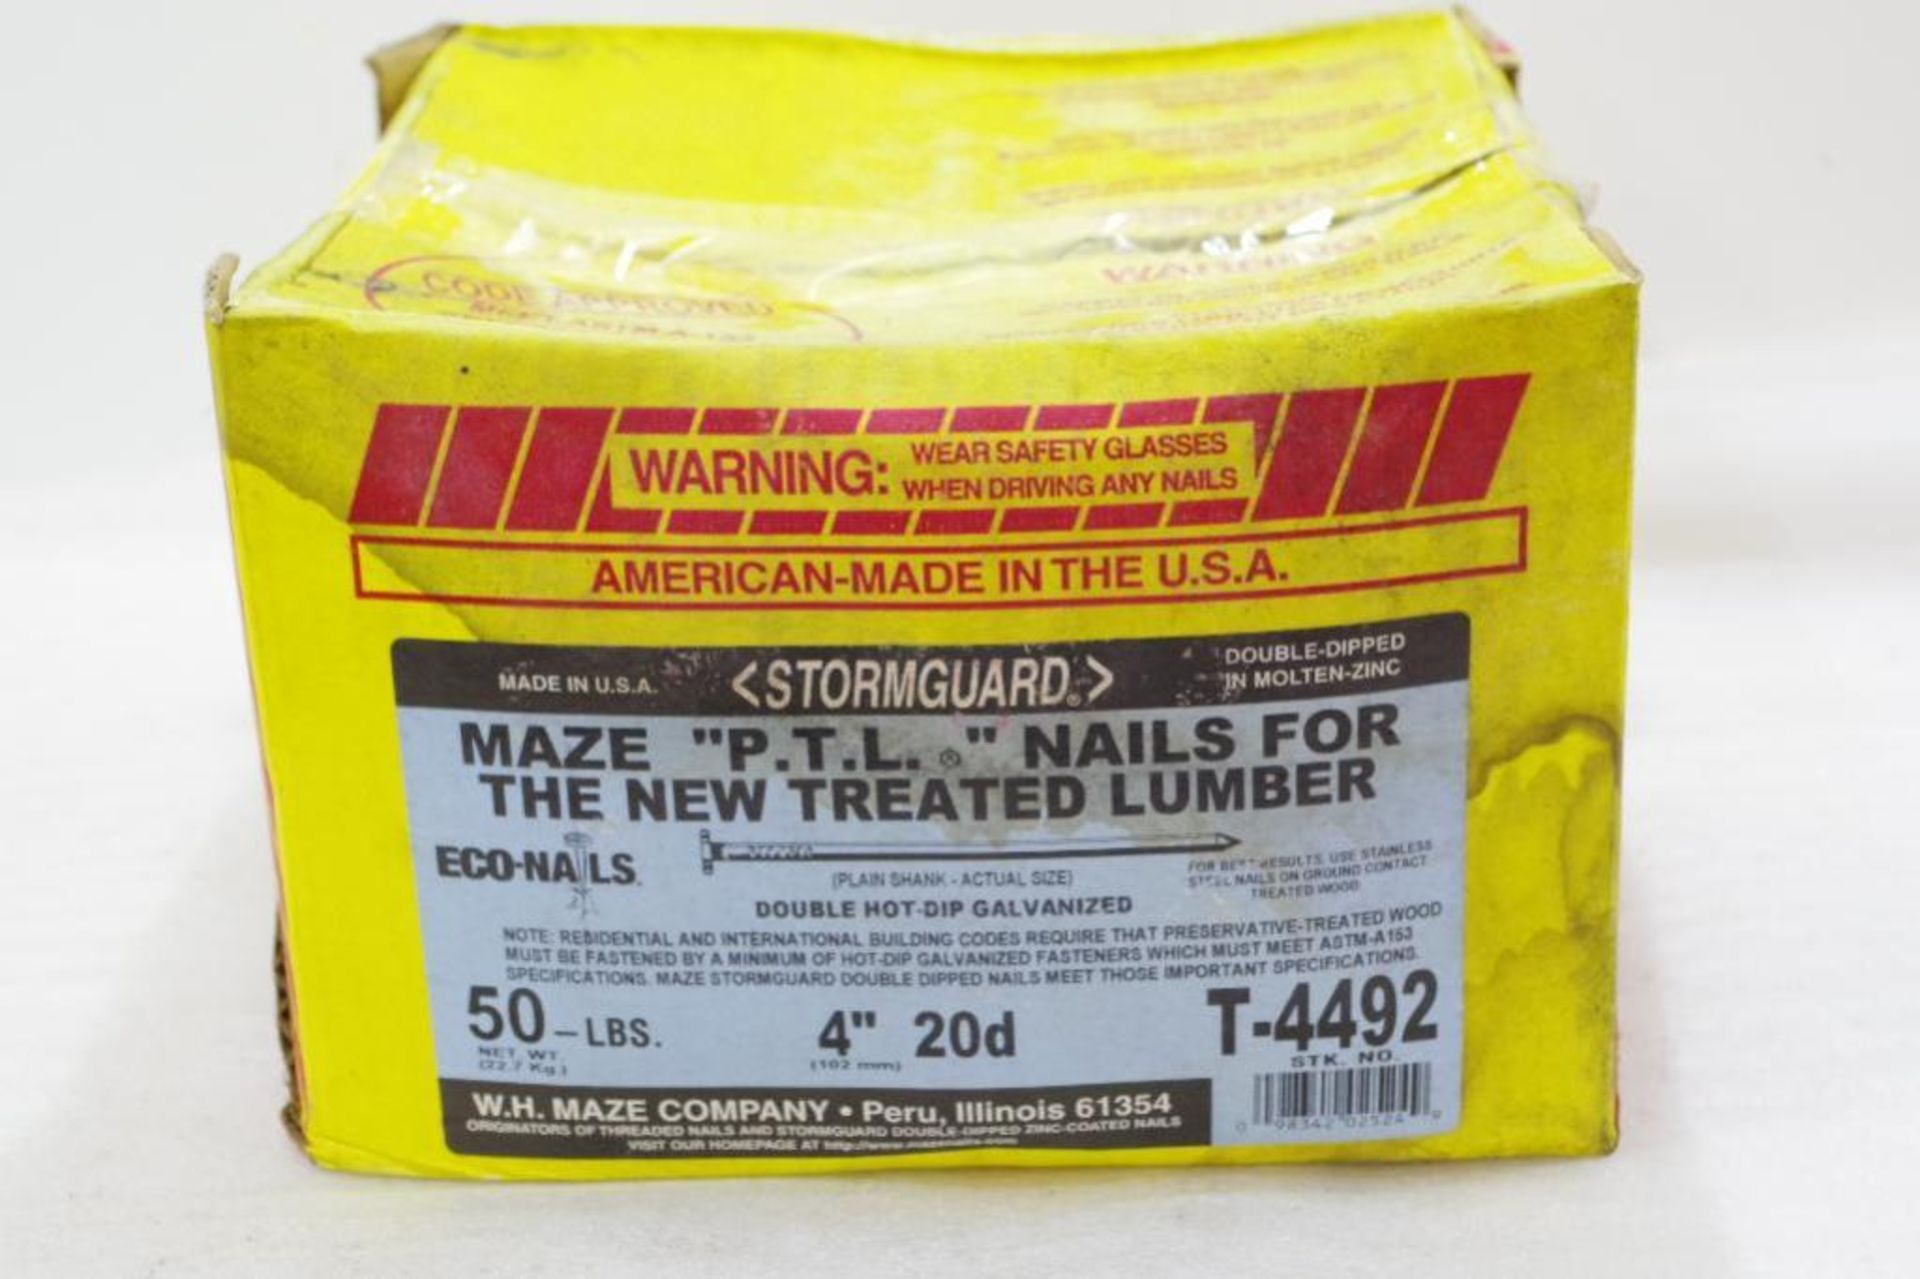 (50) Lbs. MAZE Stormguard "PTL" Nails 4" 20d M/N T-4492, Made in USA (1 Box of 50 Lbs.) - Image 5 of 5